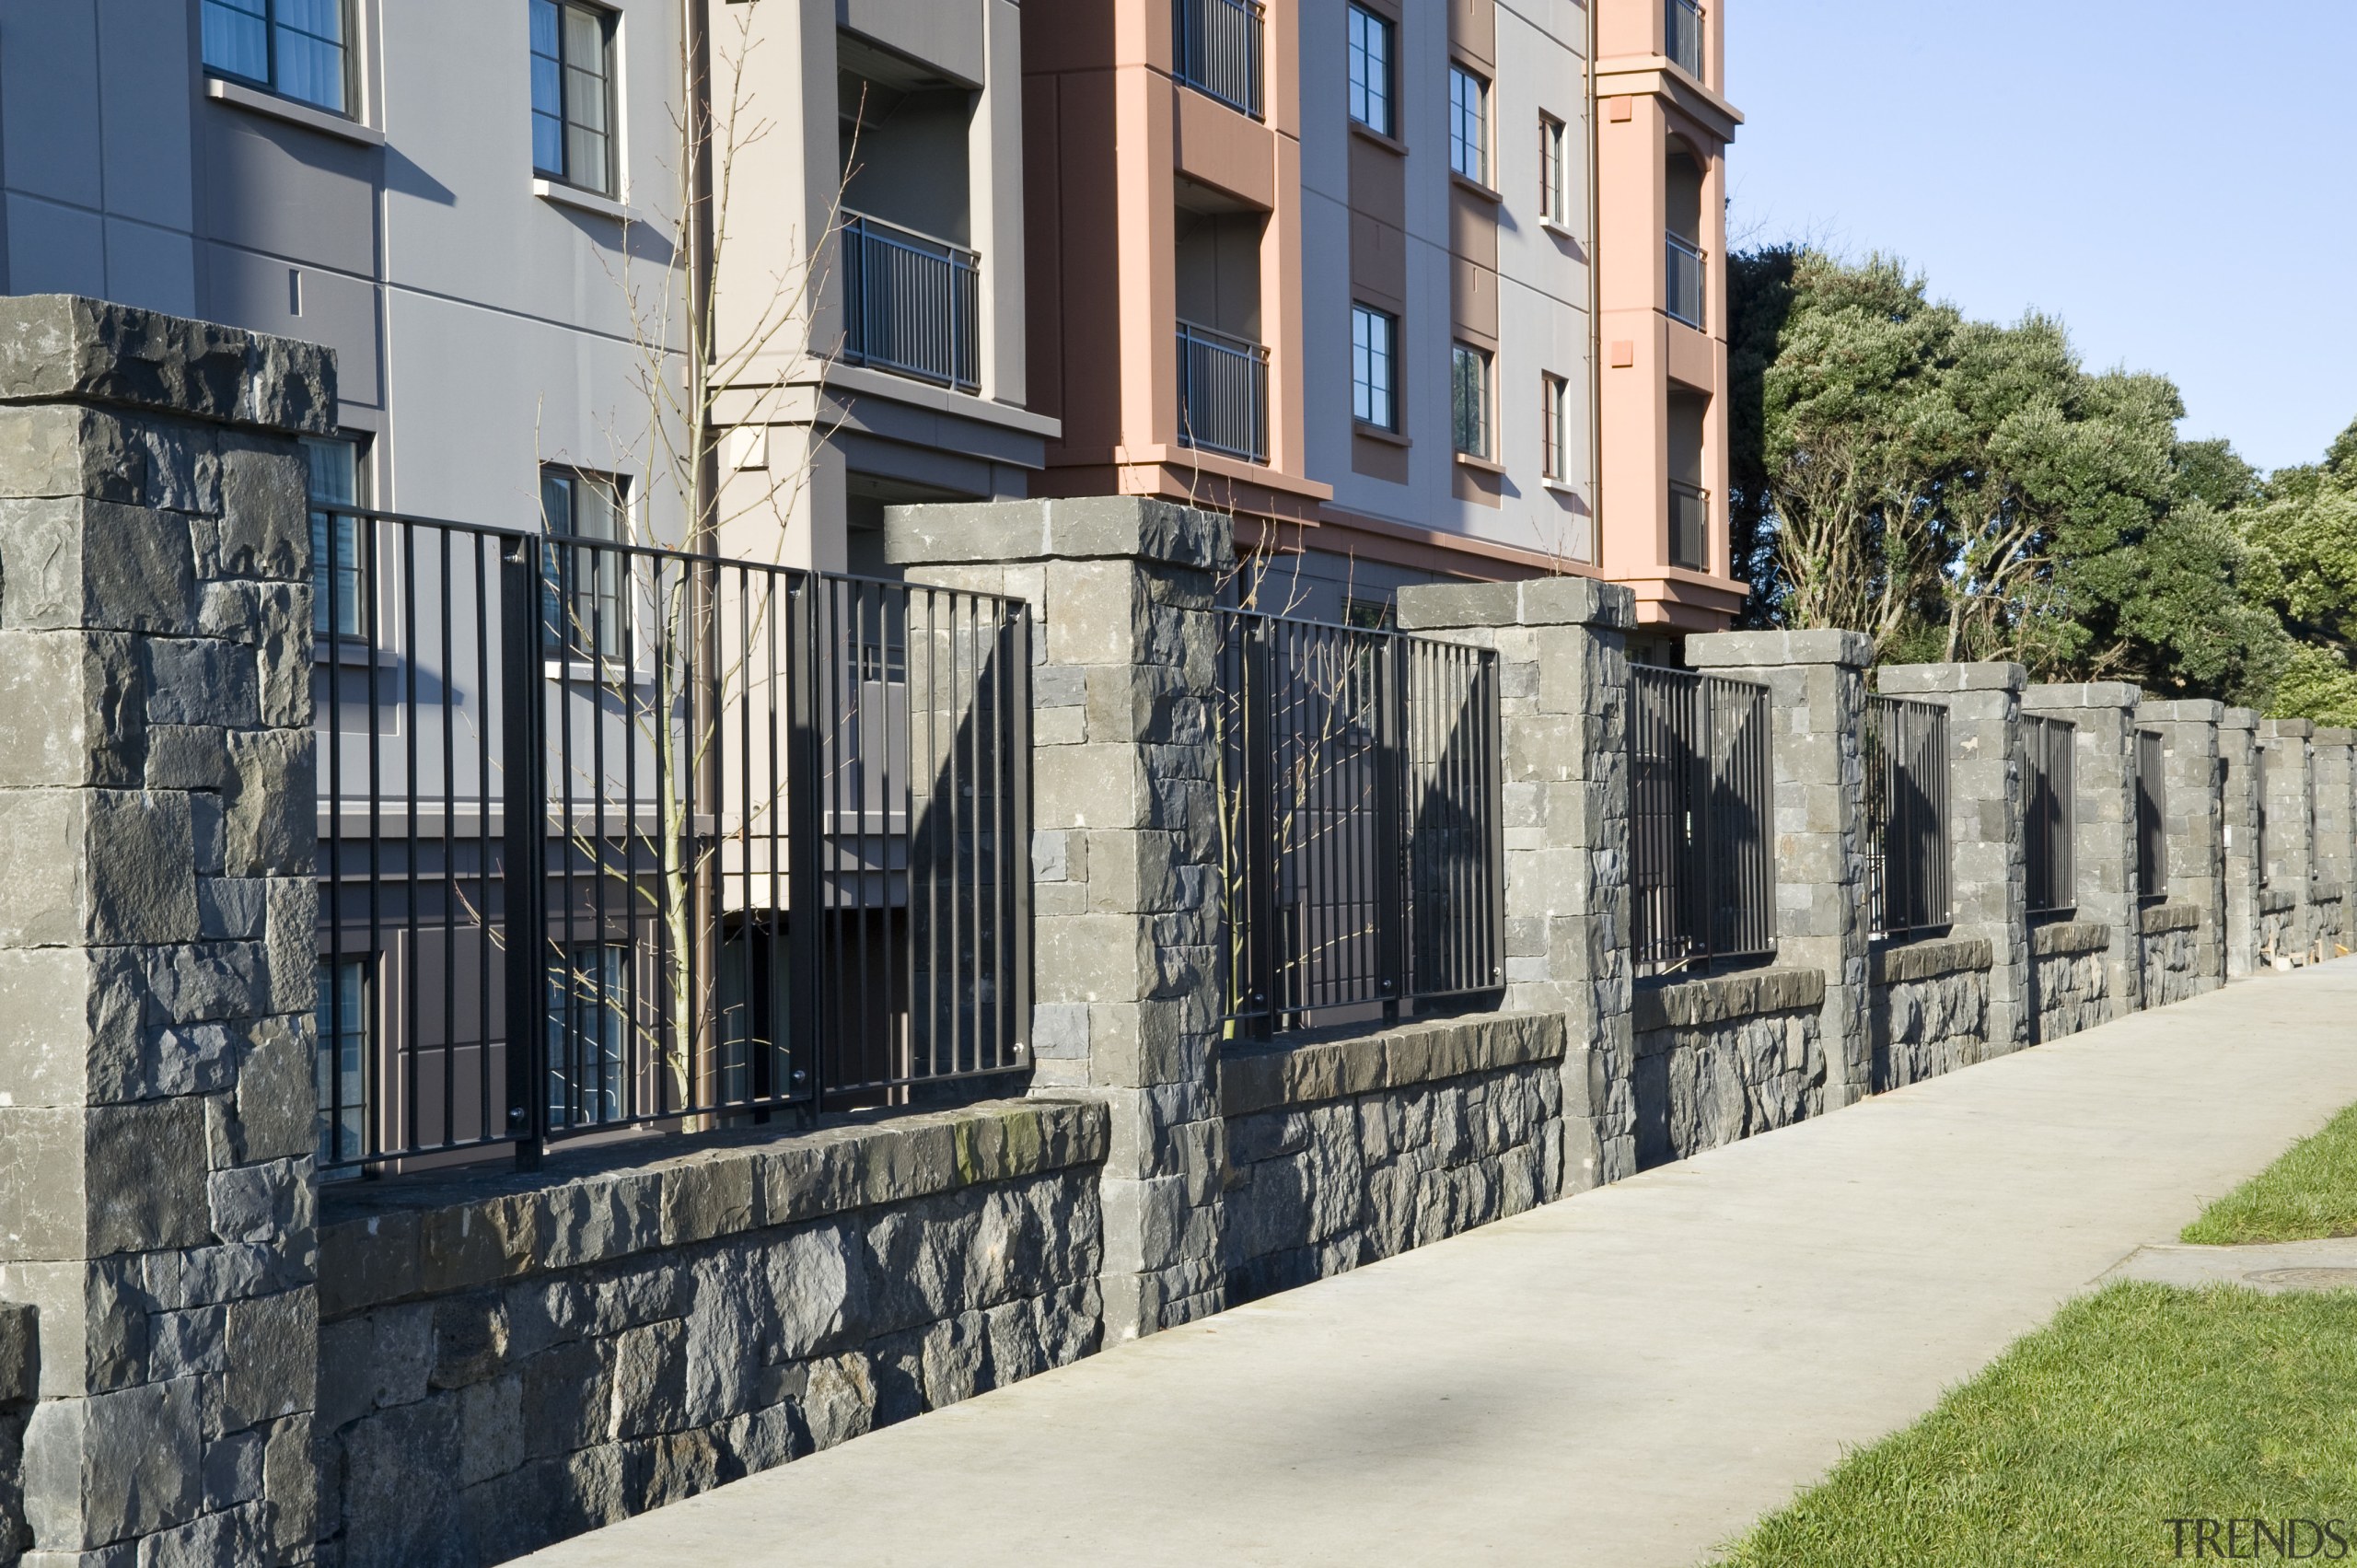 View of the stone wall with metal sections building, facade, fence, handrail, home fencing, house, iron, neighbourhood, outdoor structure, property, real estate, residential area, walkway, wall, black, gray